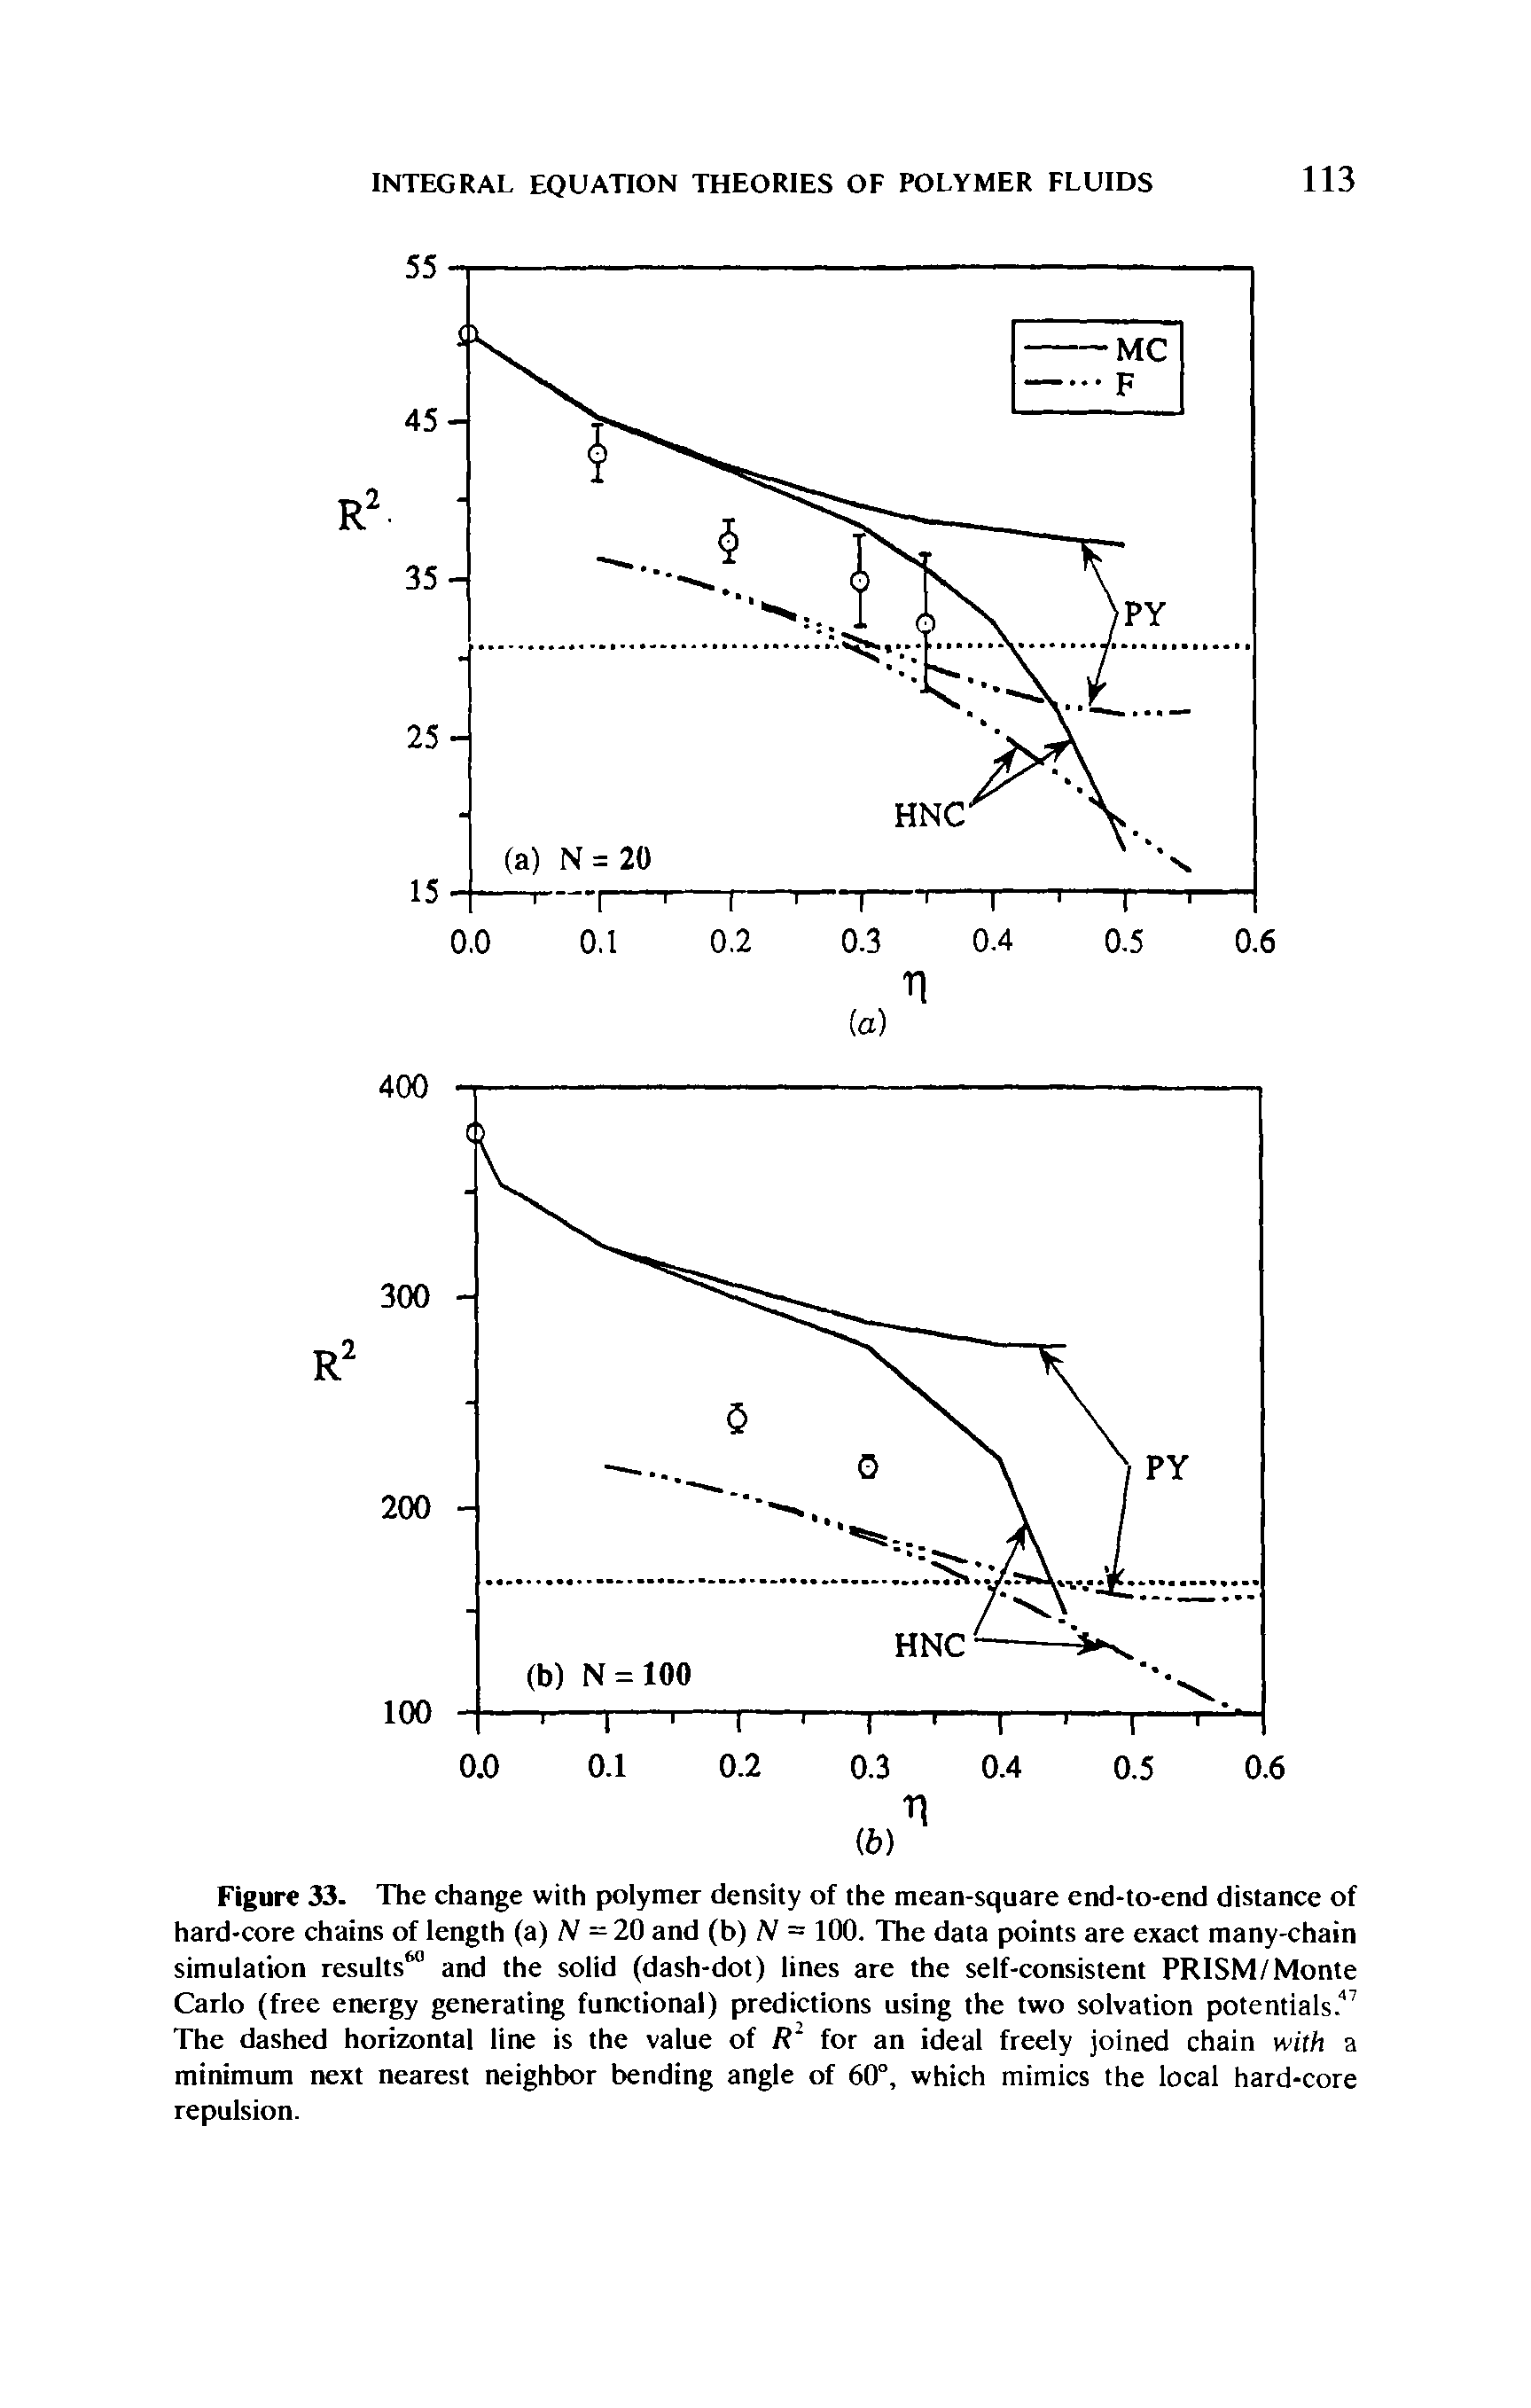 Figure 33. The change with polymer density of the mean-square end-to-end distance of hard-core chains of length (a) N =20 and (b) /V = 100. The data points are exact many-chain simulation results and the solid (dash-dot) lines are the self-consistent PRISM/Monte Carlo (free energy generating fuiKtional) predictions using the two solvation potentials." The dashed horizontal line is the value of / for an ideal freely joined chain with a minimum next nearest neighbor bending angle of 60°, which mimics the local hard-core repulsion.